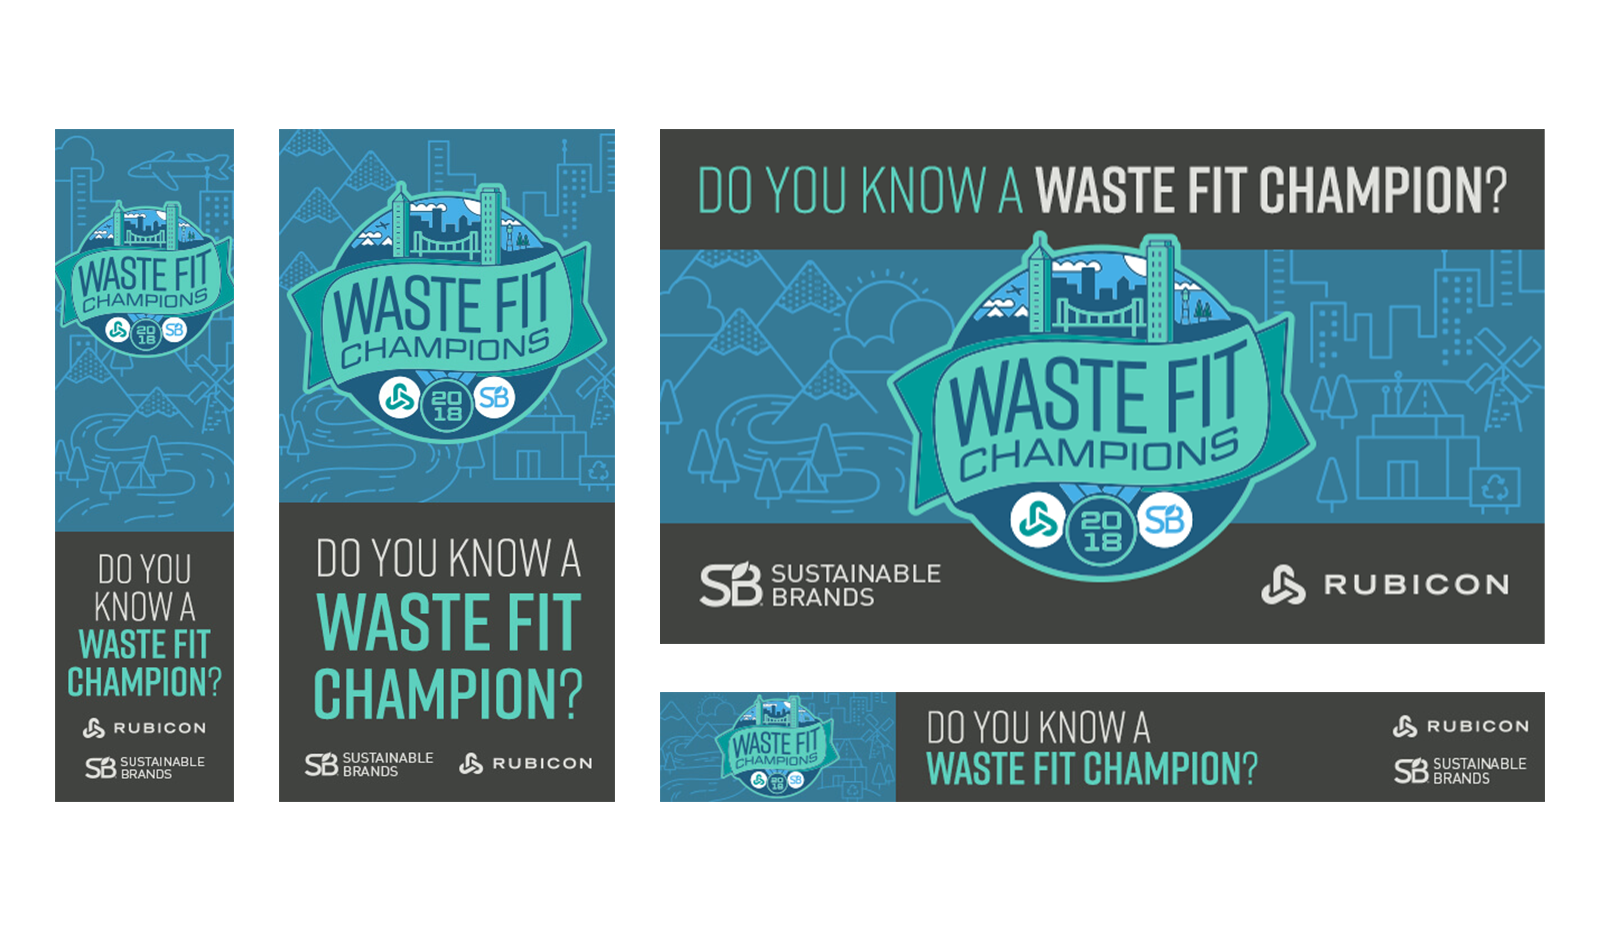 Waste Fit Champions campaign digital ads for Rubicon